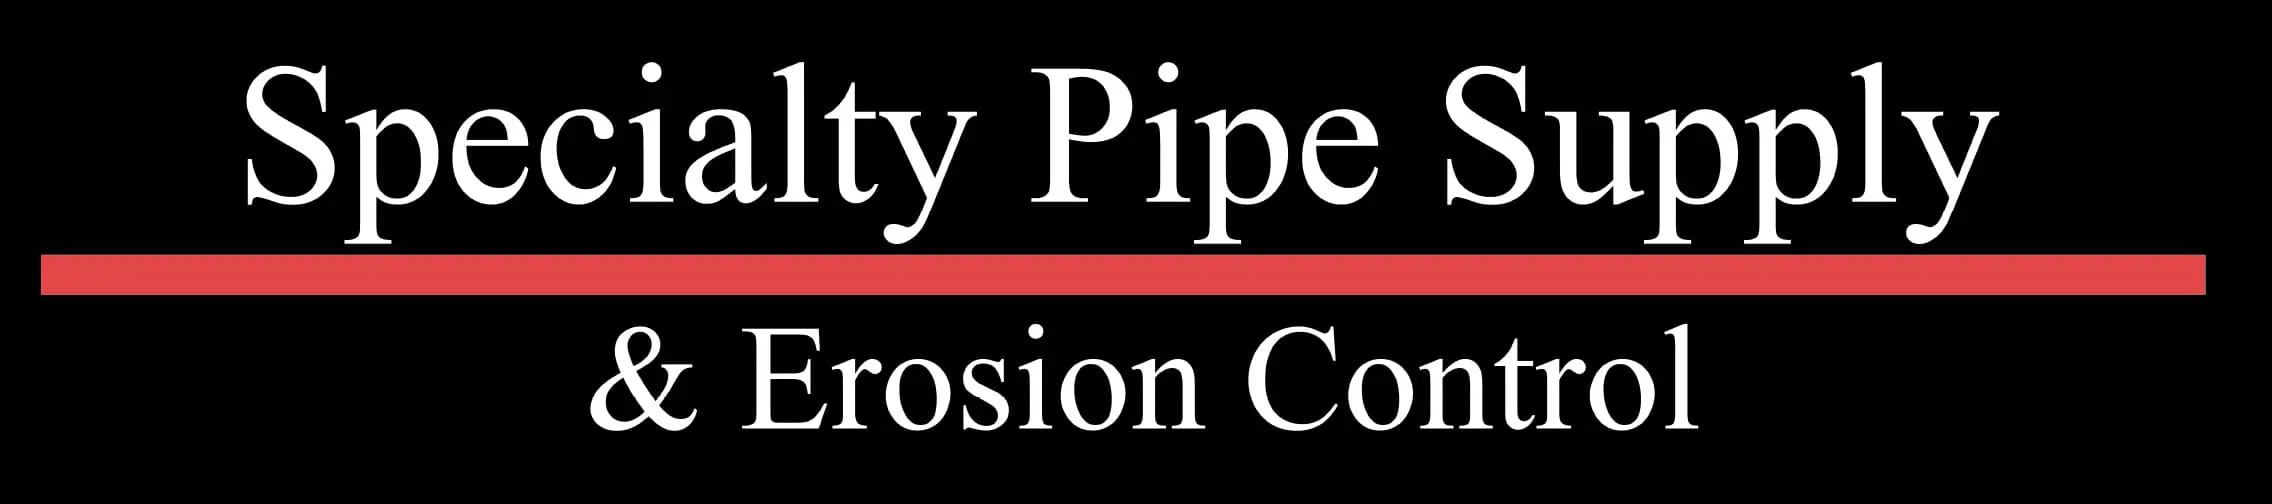 Specialty Pipe Supply & Erosion Control